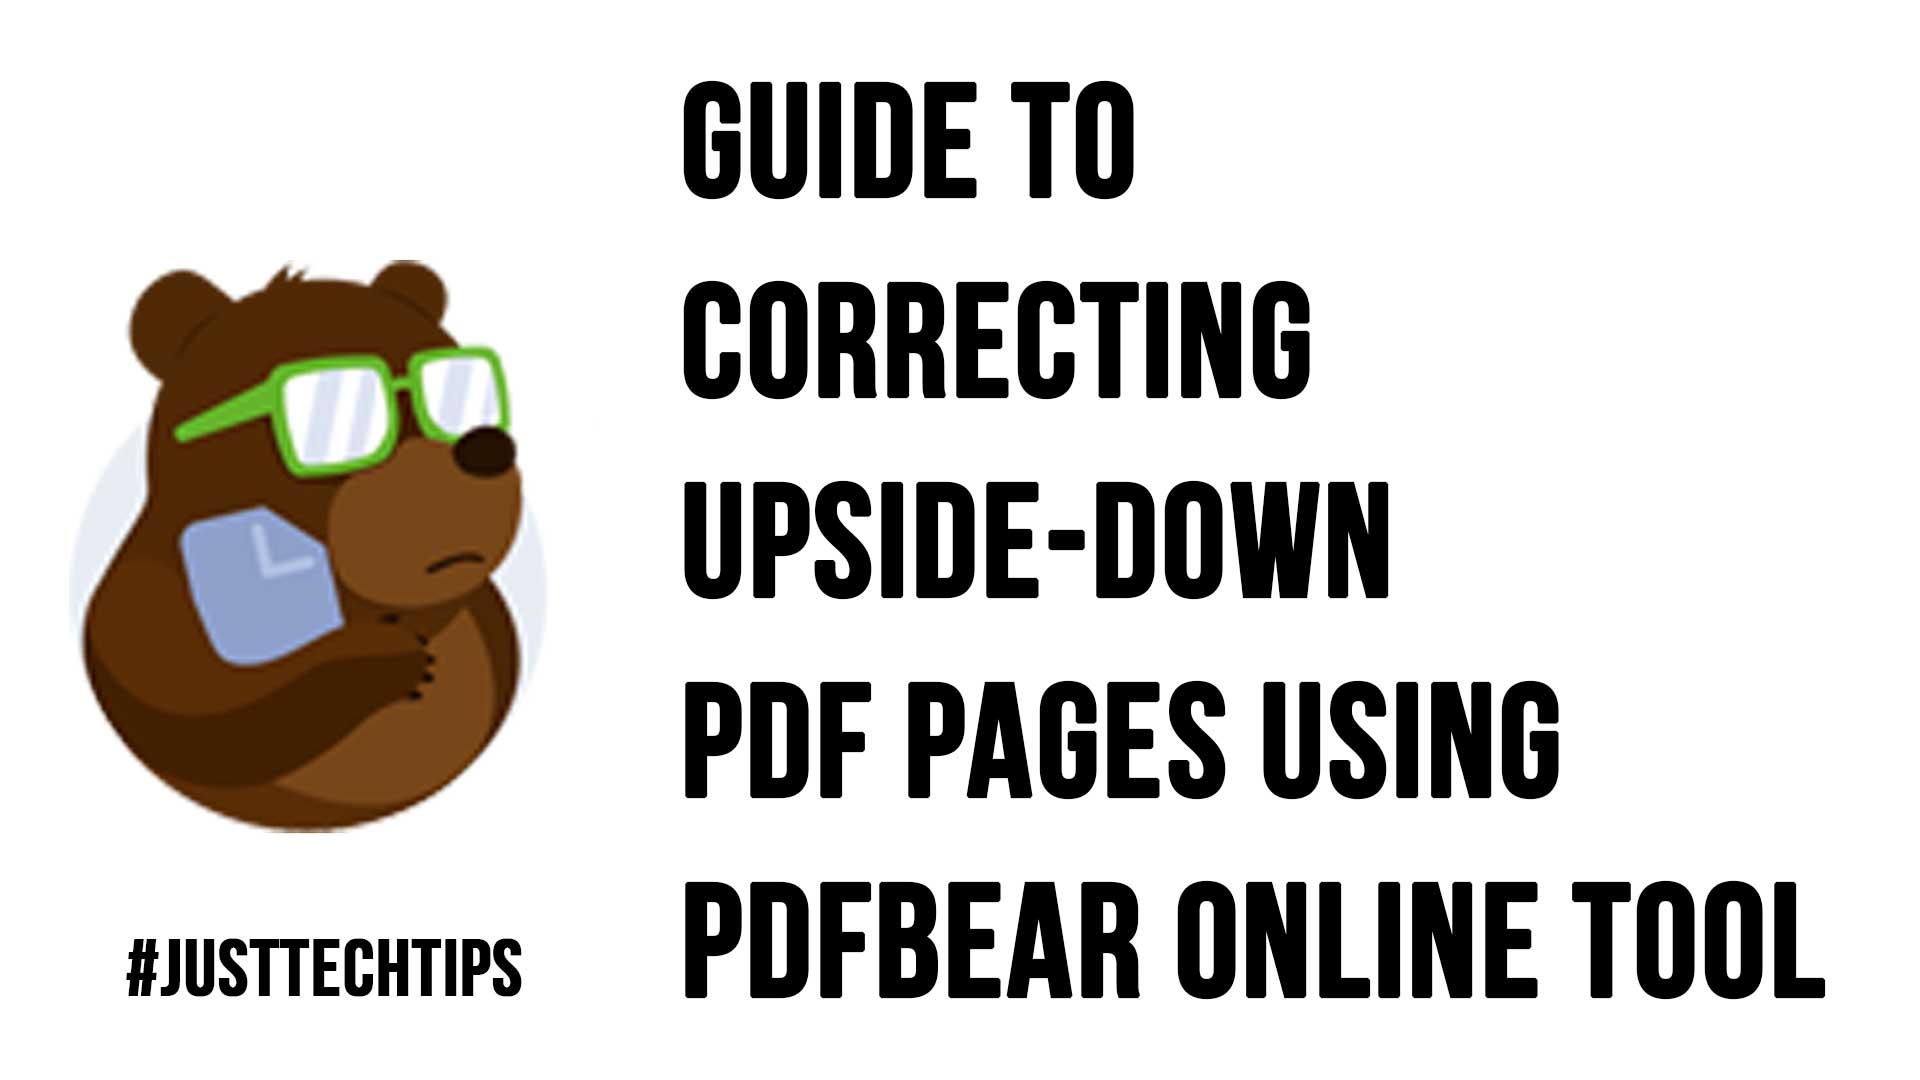 Guide to Correcting Upside Down PDF Pages Using PDFBear Online Tool